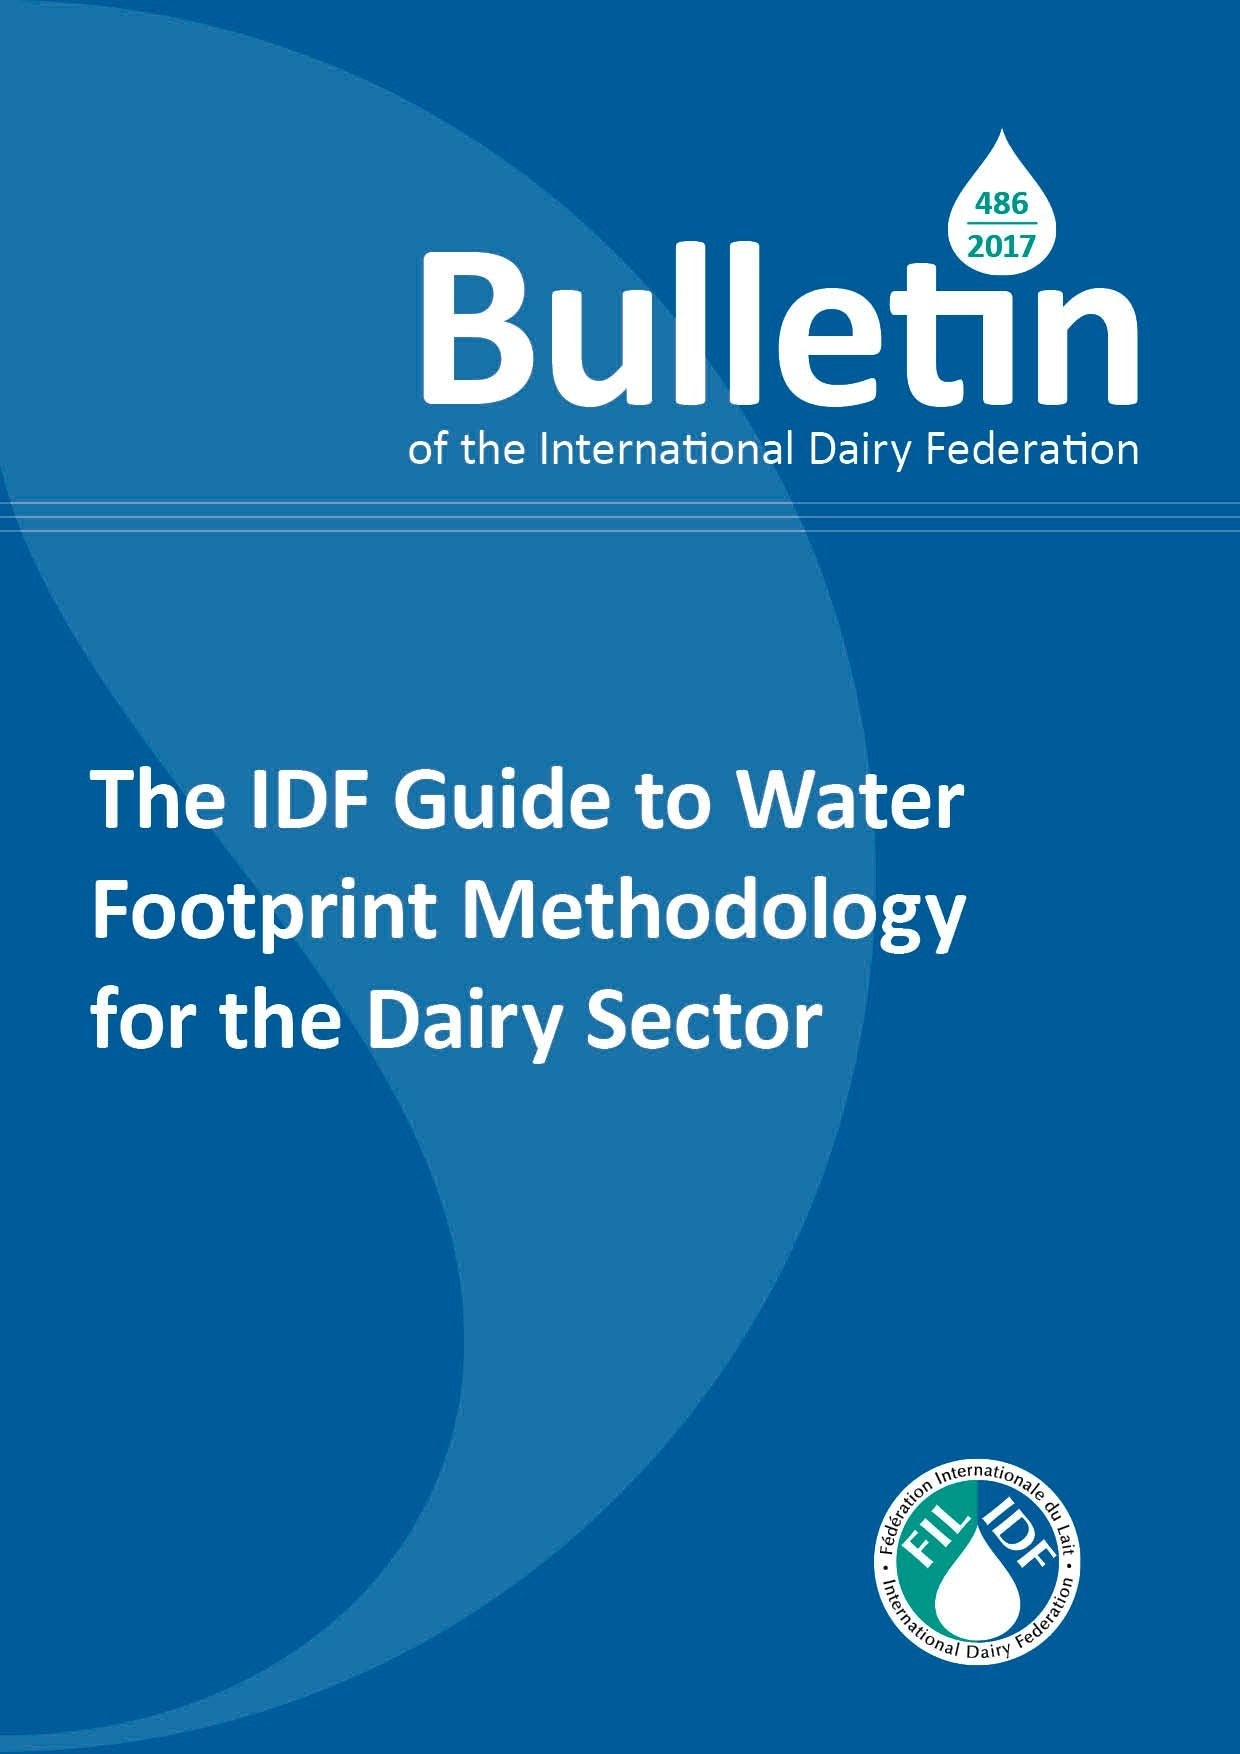 Bulletin of the IDF N° 486/ 2017: The IDF Guide to Water Footprint Methodology for the Dairy Sector (in English) - FIL-IDF